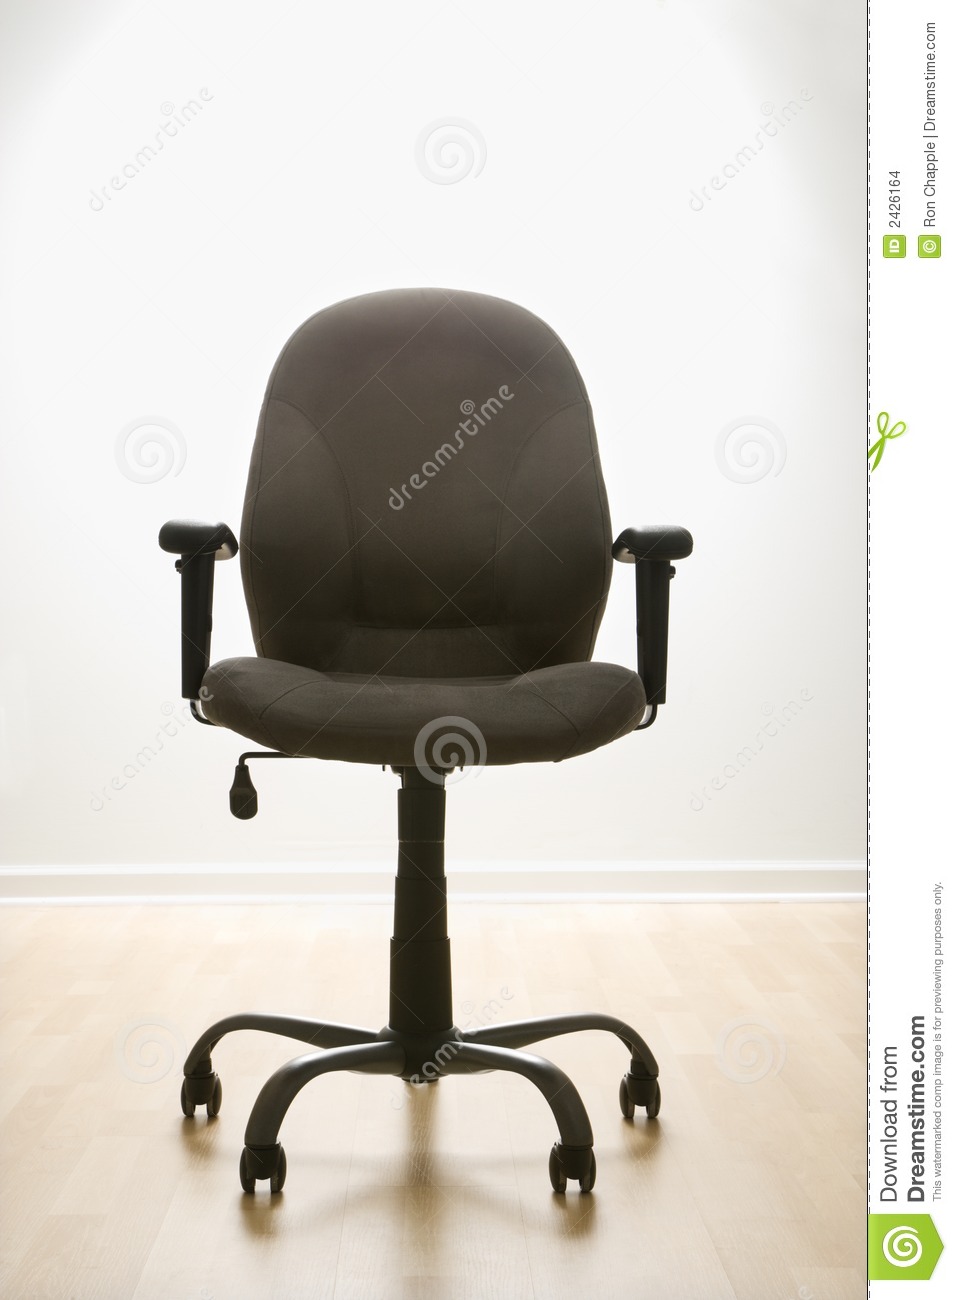 Empty Office Desk Chair  Stock Images   Image  2426164